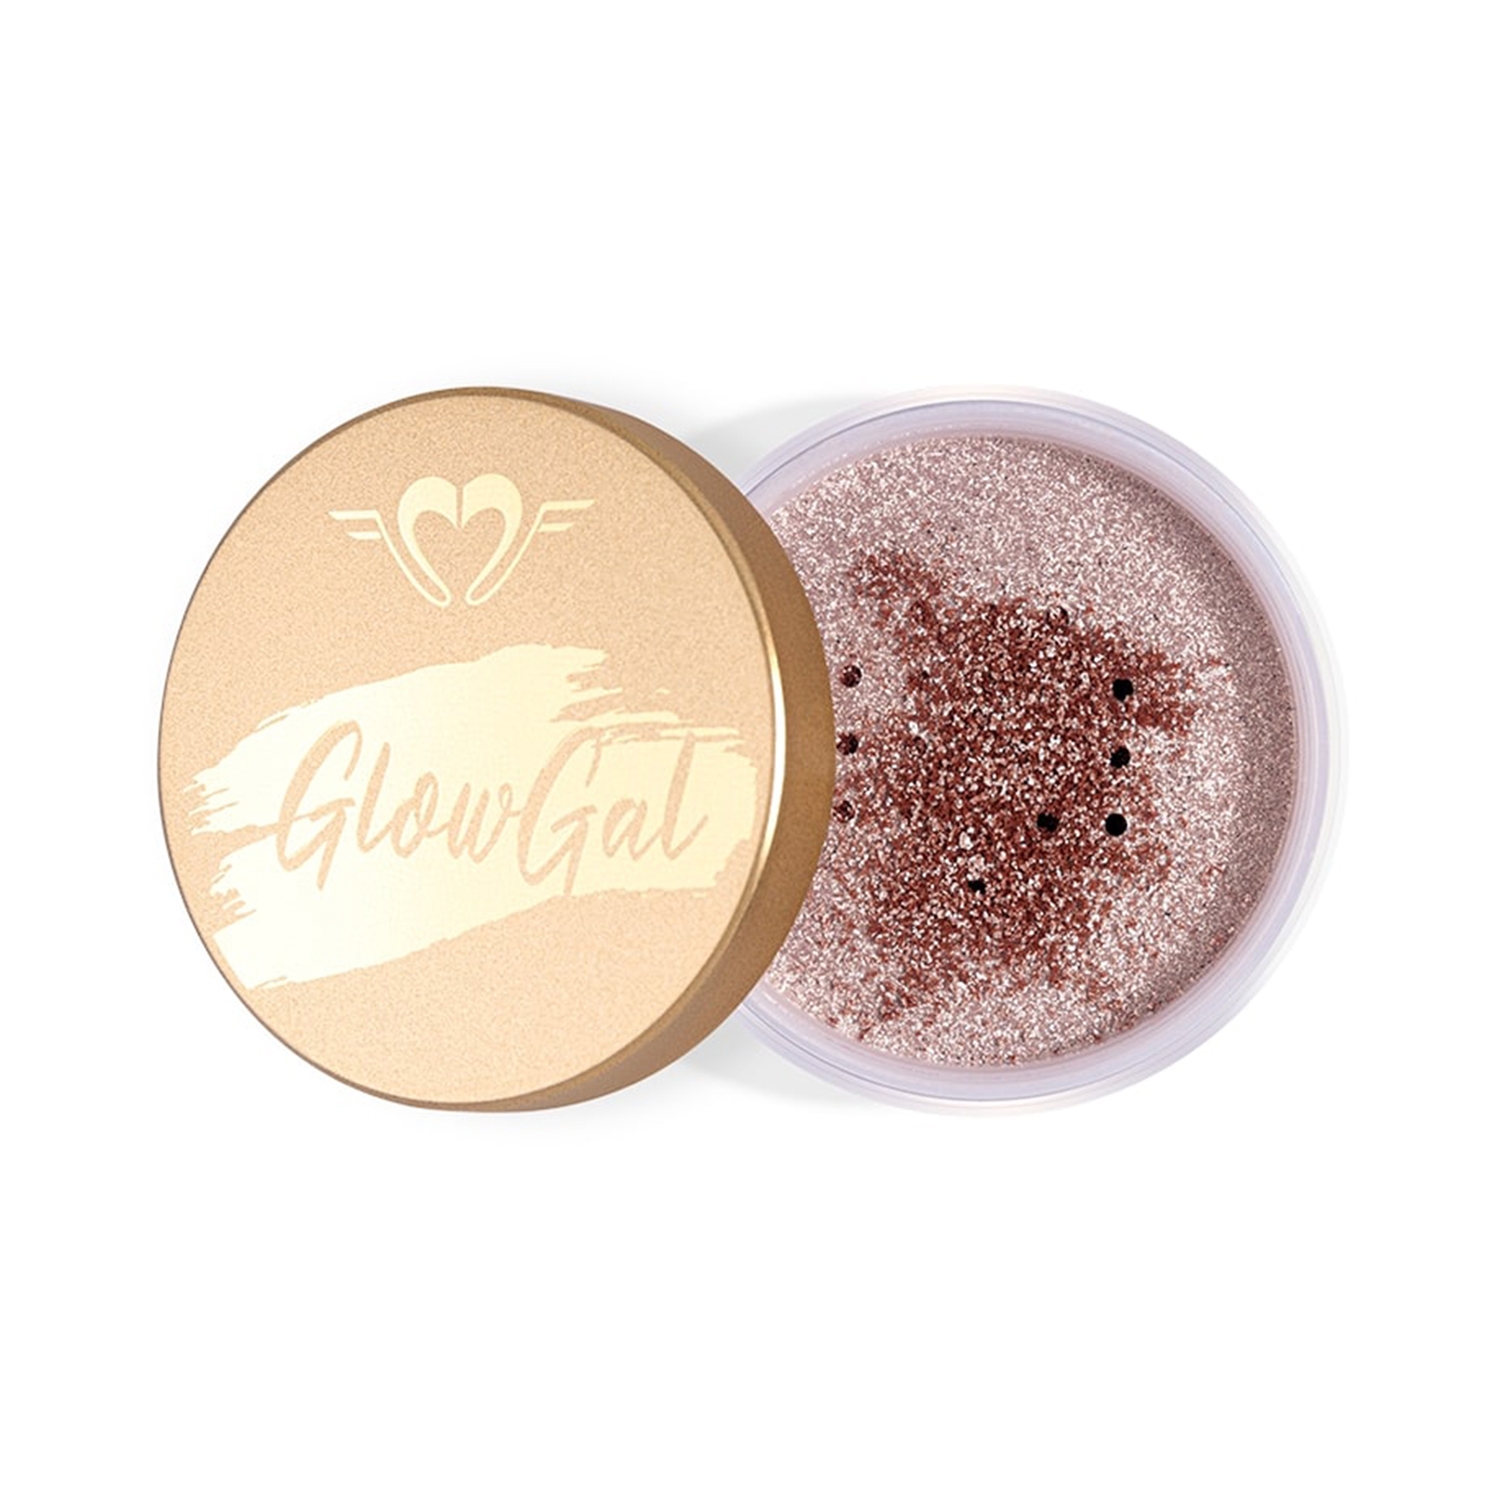 Daily Life Forever52 | Daily Life Forever52 Glow Gal Loose Highlighter GGH002 - Golden Brown (15g)